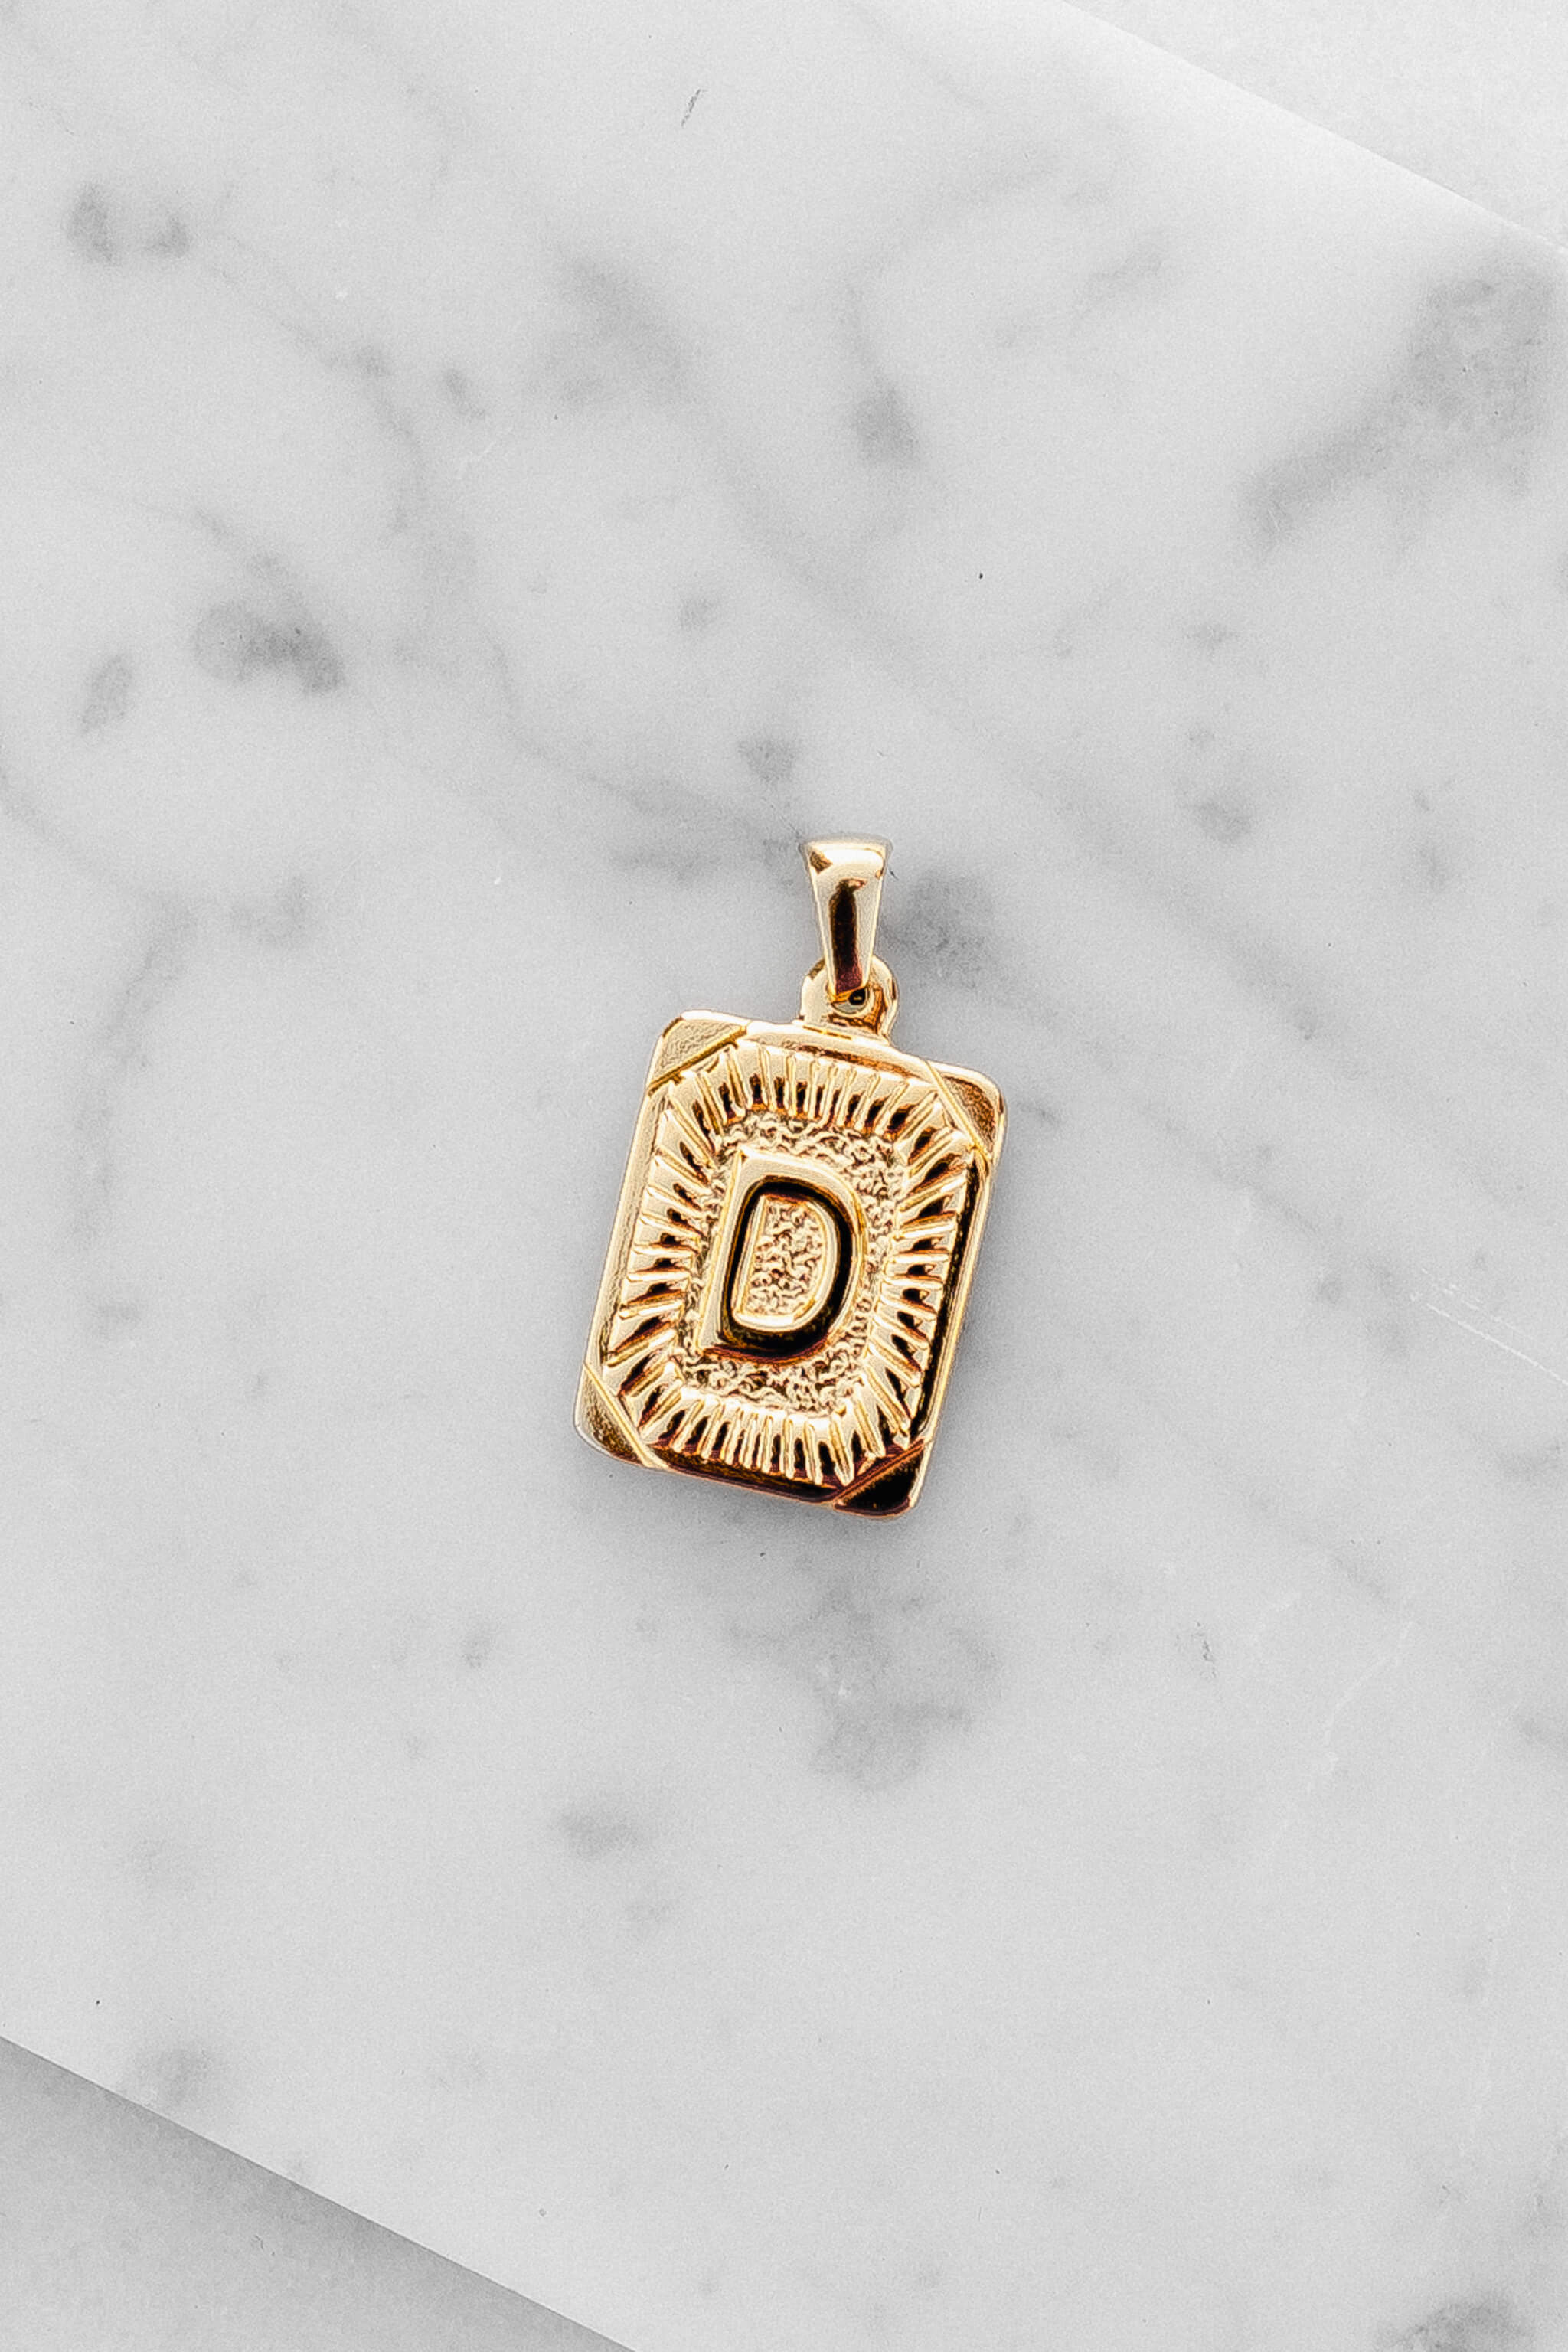 Gold Monogram Letter "D" Charm laying on a marble